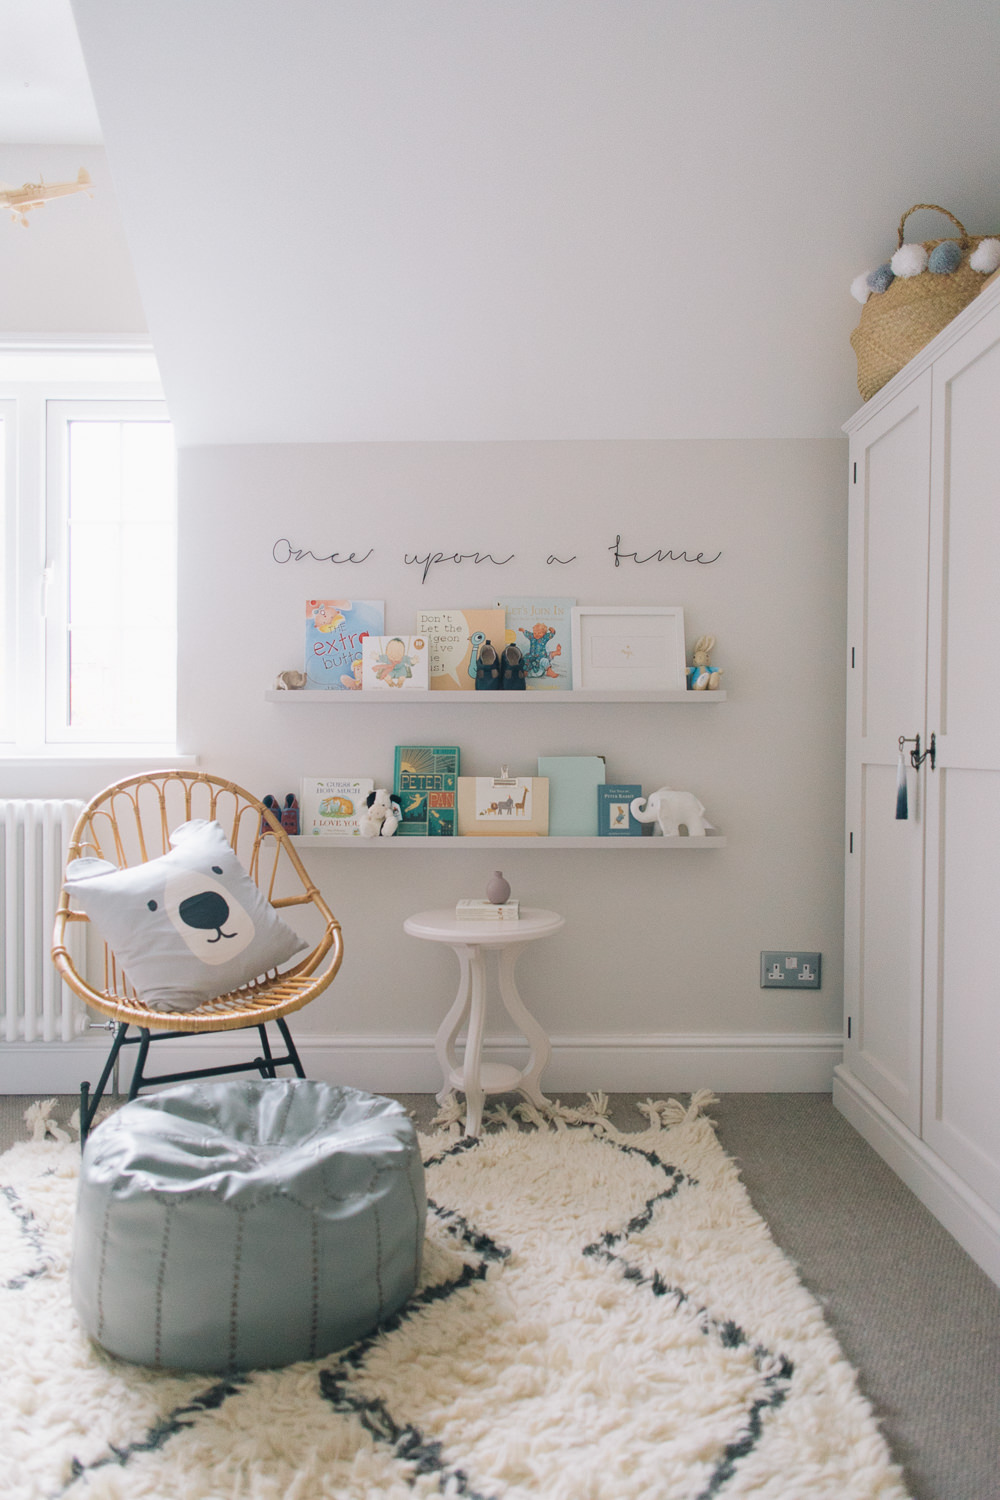 Nursery reading corner with ikea painted ledges and once upon a time wire sign